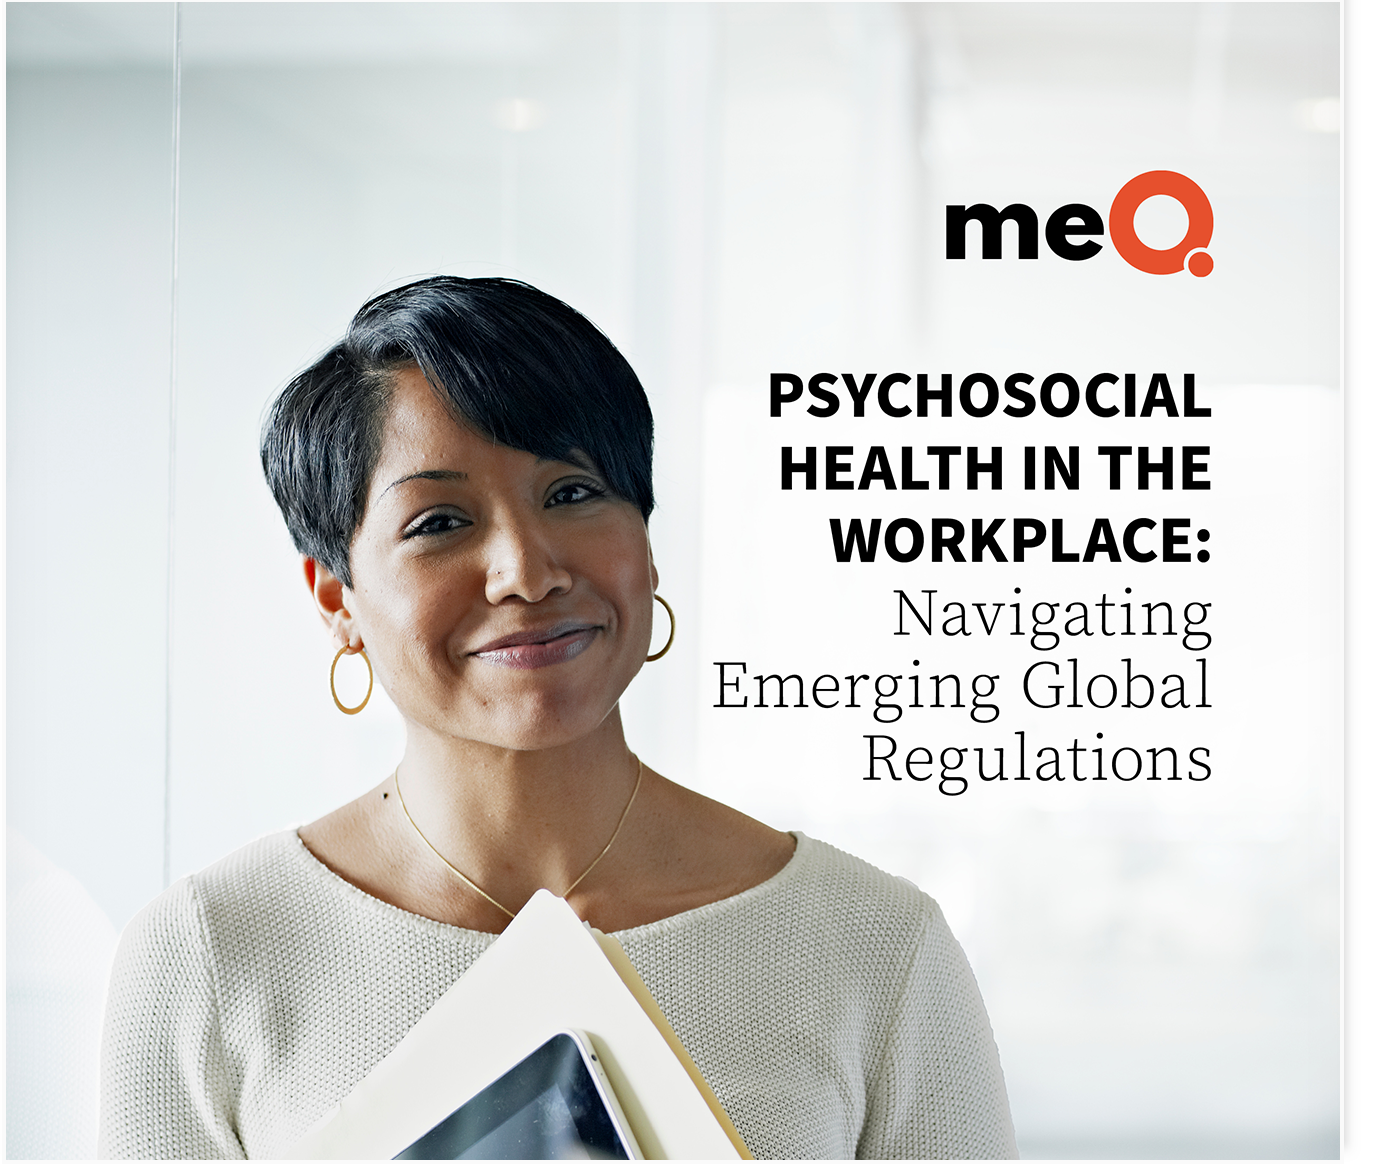 Psychosocial Health in the Workplace: Navigating Emerging Global Regulations